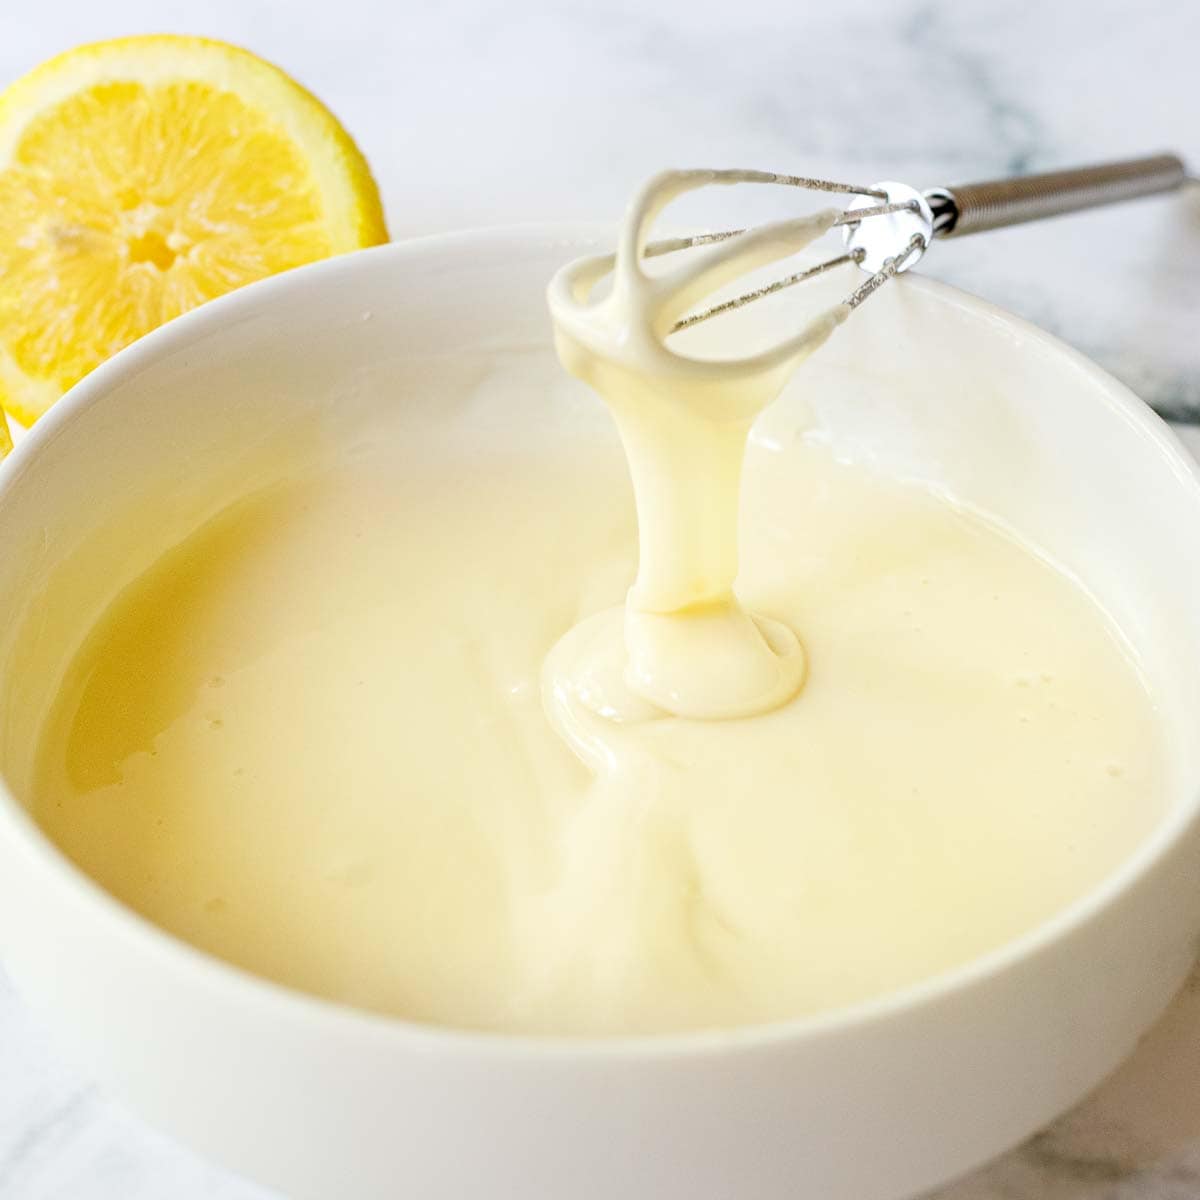 This easy Lemon Glaze is made with three simple ingredients in under 3 minutes flat! It hardens, stays white, and holds its shape, perfect for cakes, scones, cookies and morning breads. Vegan & gluten-free.